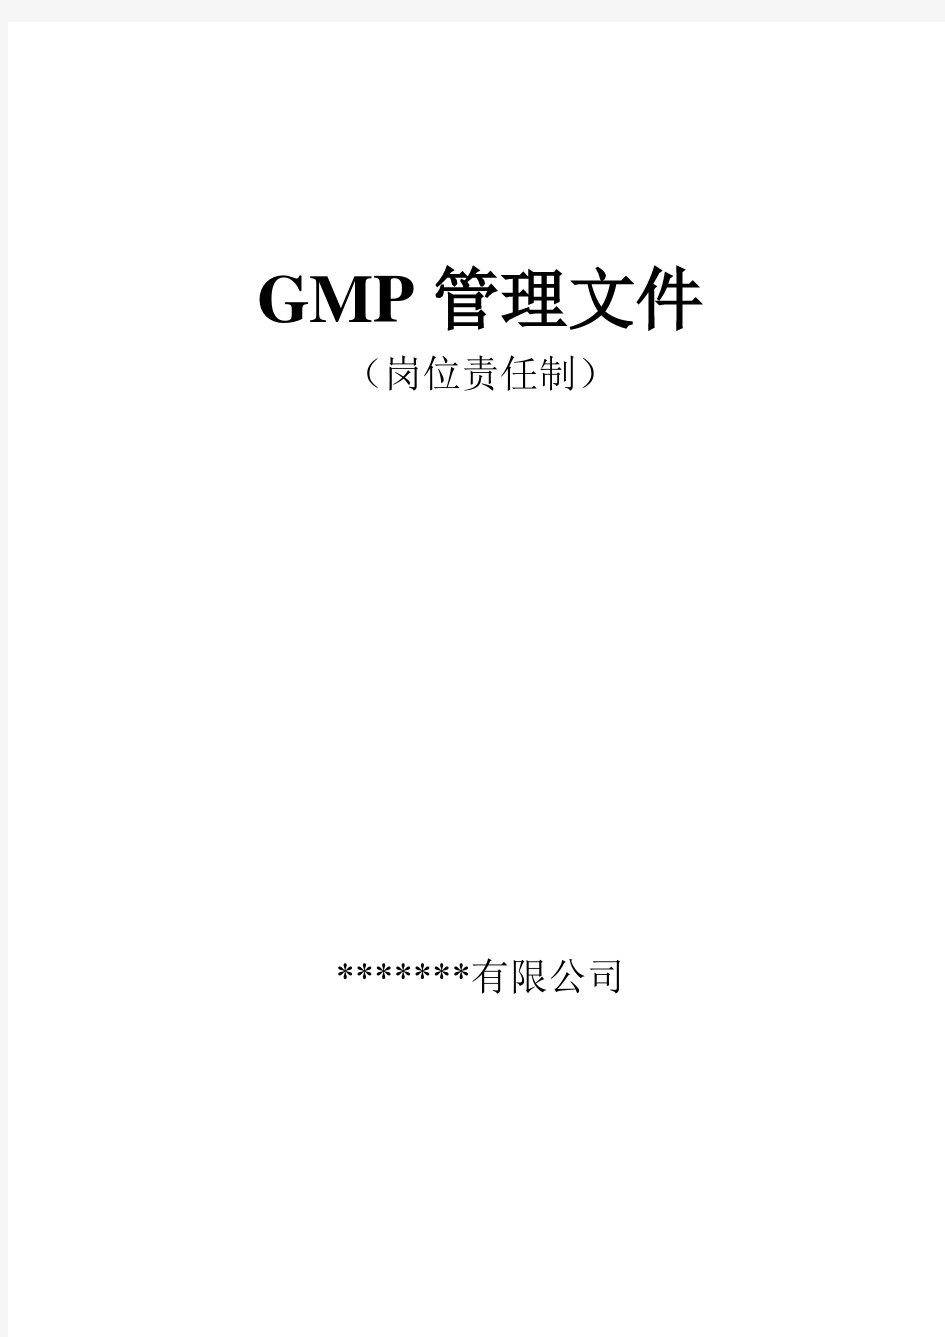 gmp管理文件体系岗位责任制